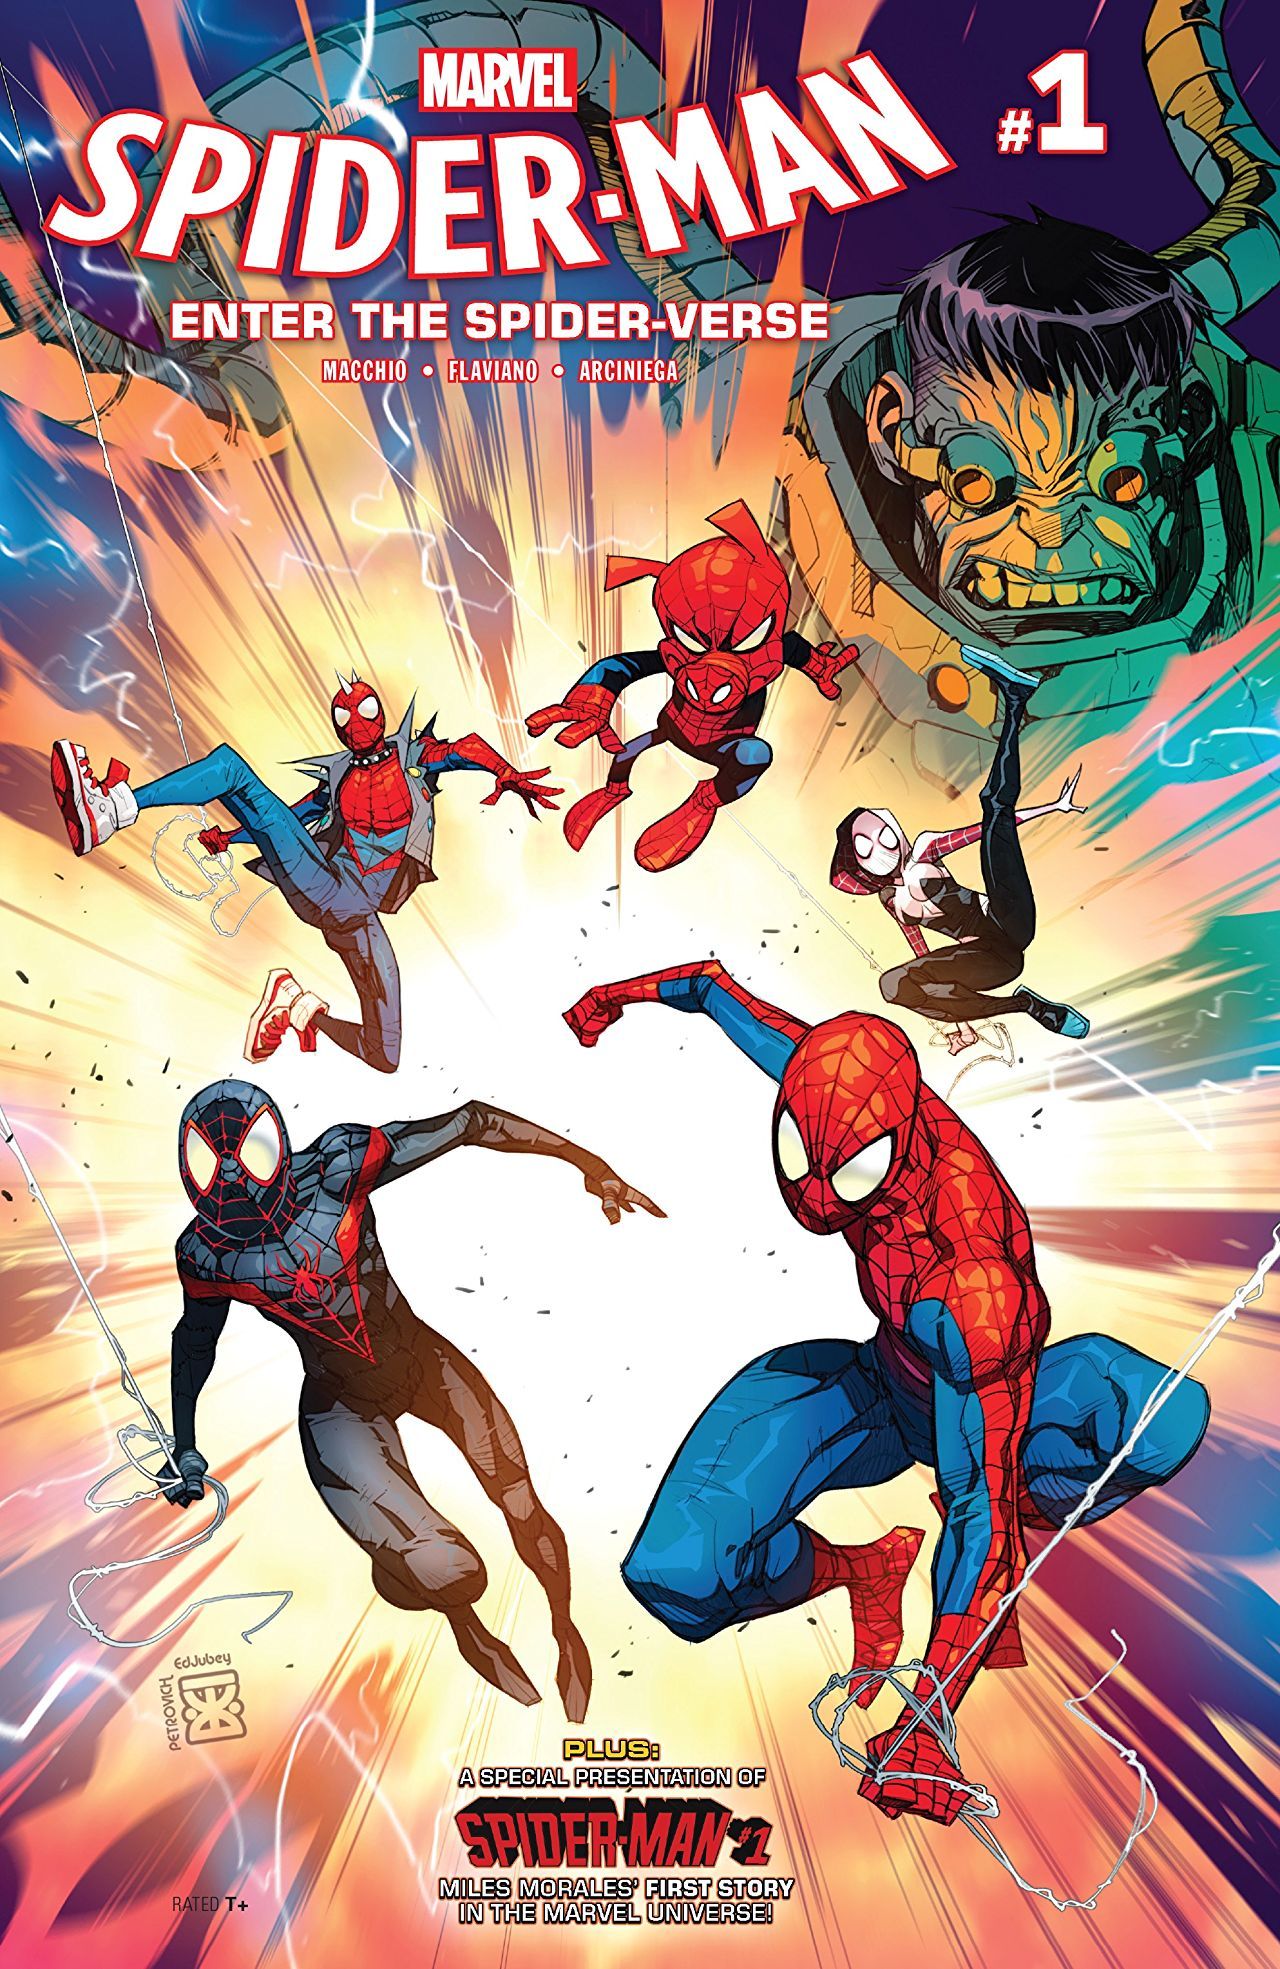 Geek insider, geekinsider, geekinsider. Com,, web warriors: an into the spider-verse reading guide, entertainment